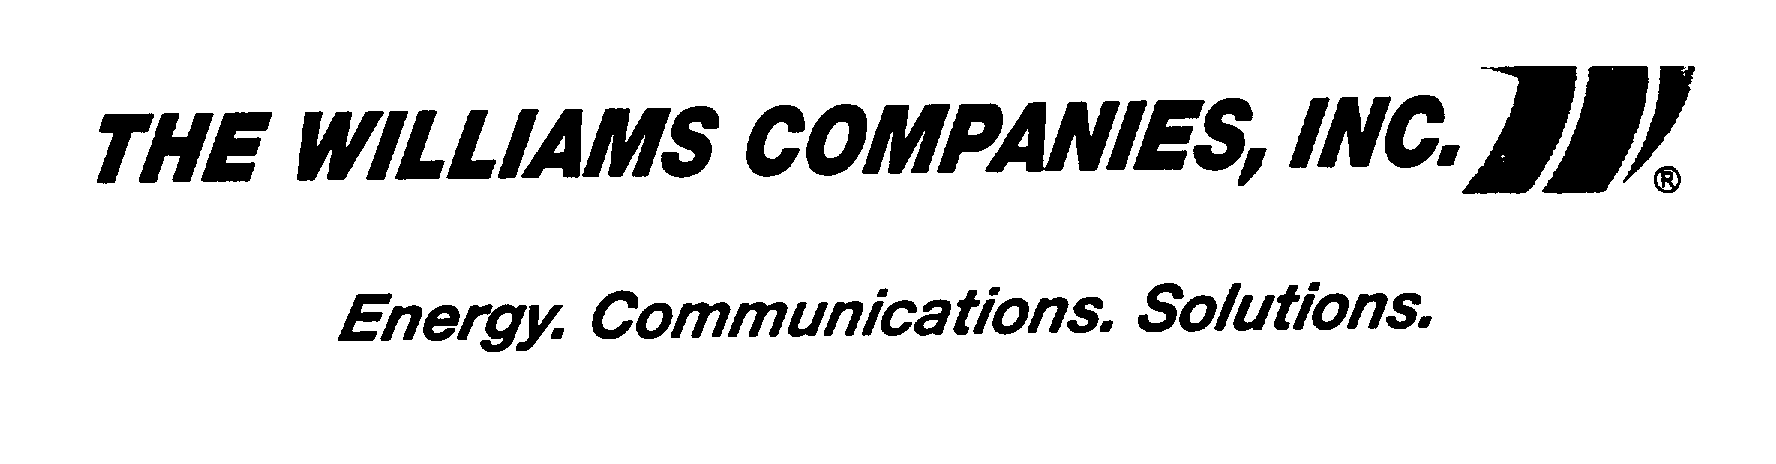 Trademark Logo THE WILLIAMS COMPANIES, INC. ENERGY. COMMUNICATIONS. SOLUTIONS.